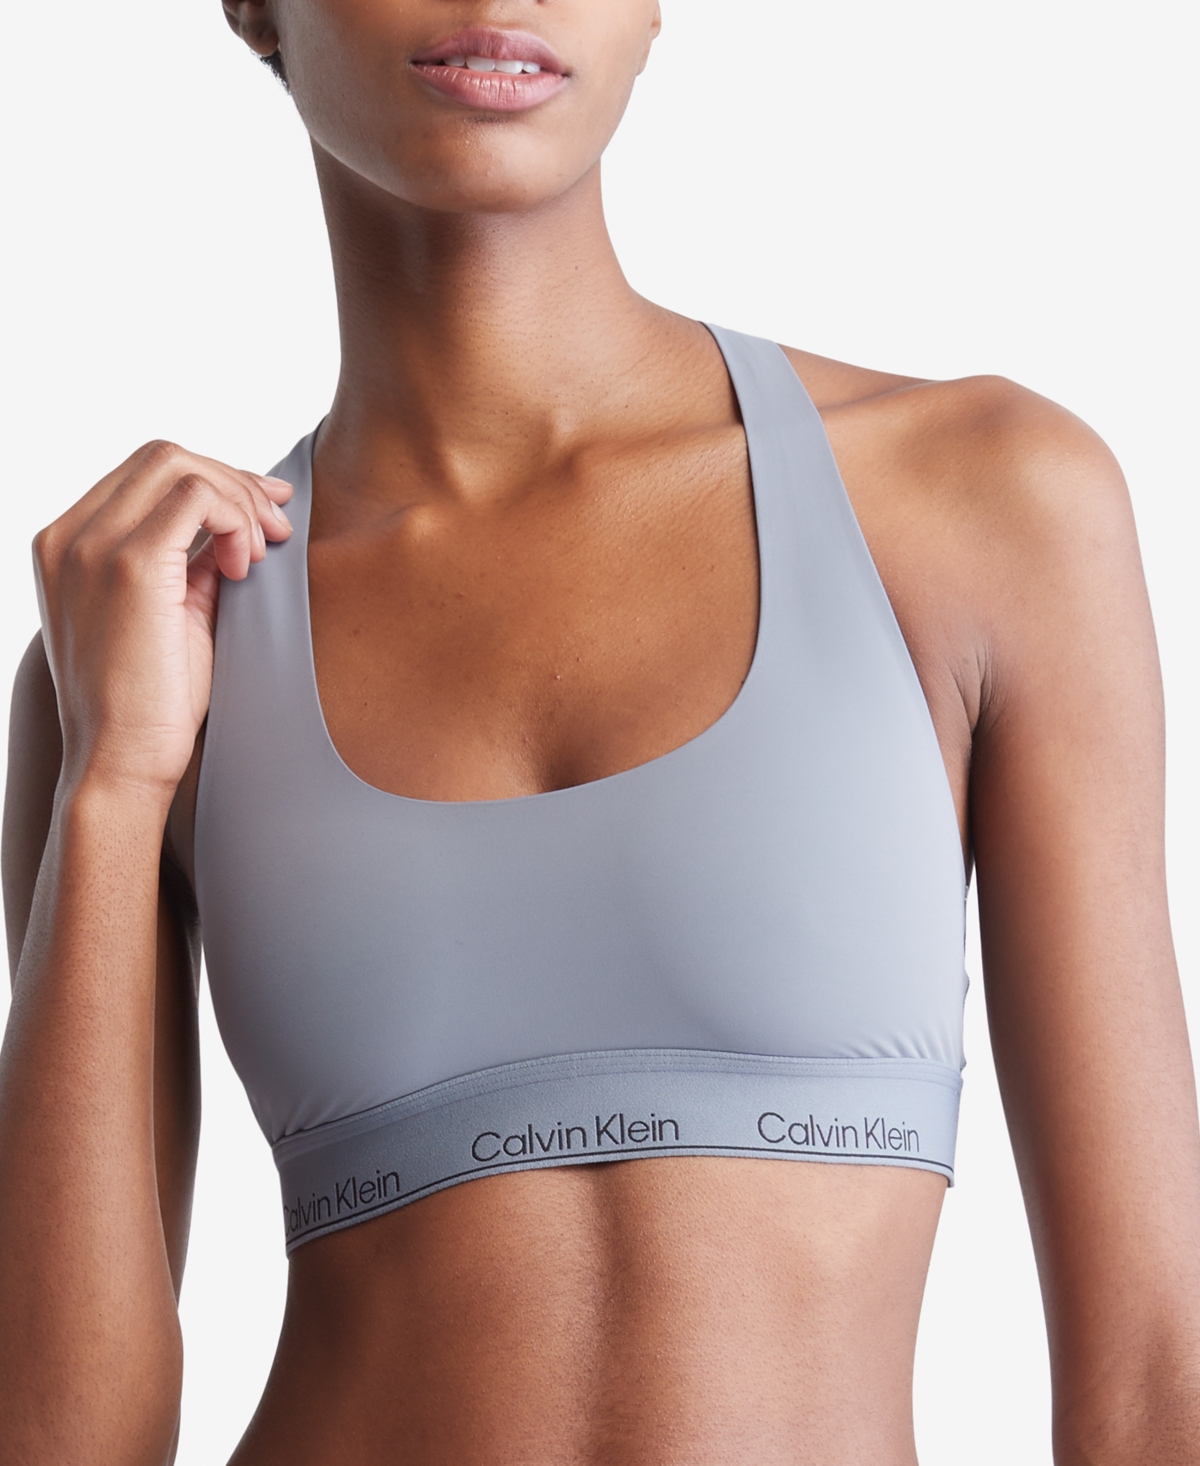 Calvin Klein Future Shift unlined bralette with contrast logo